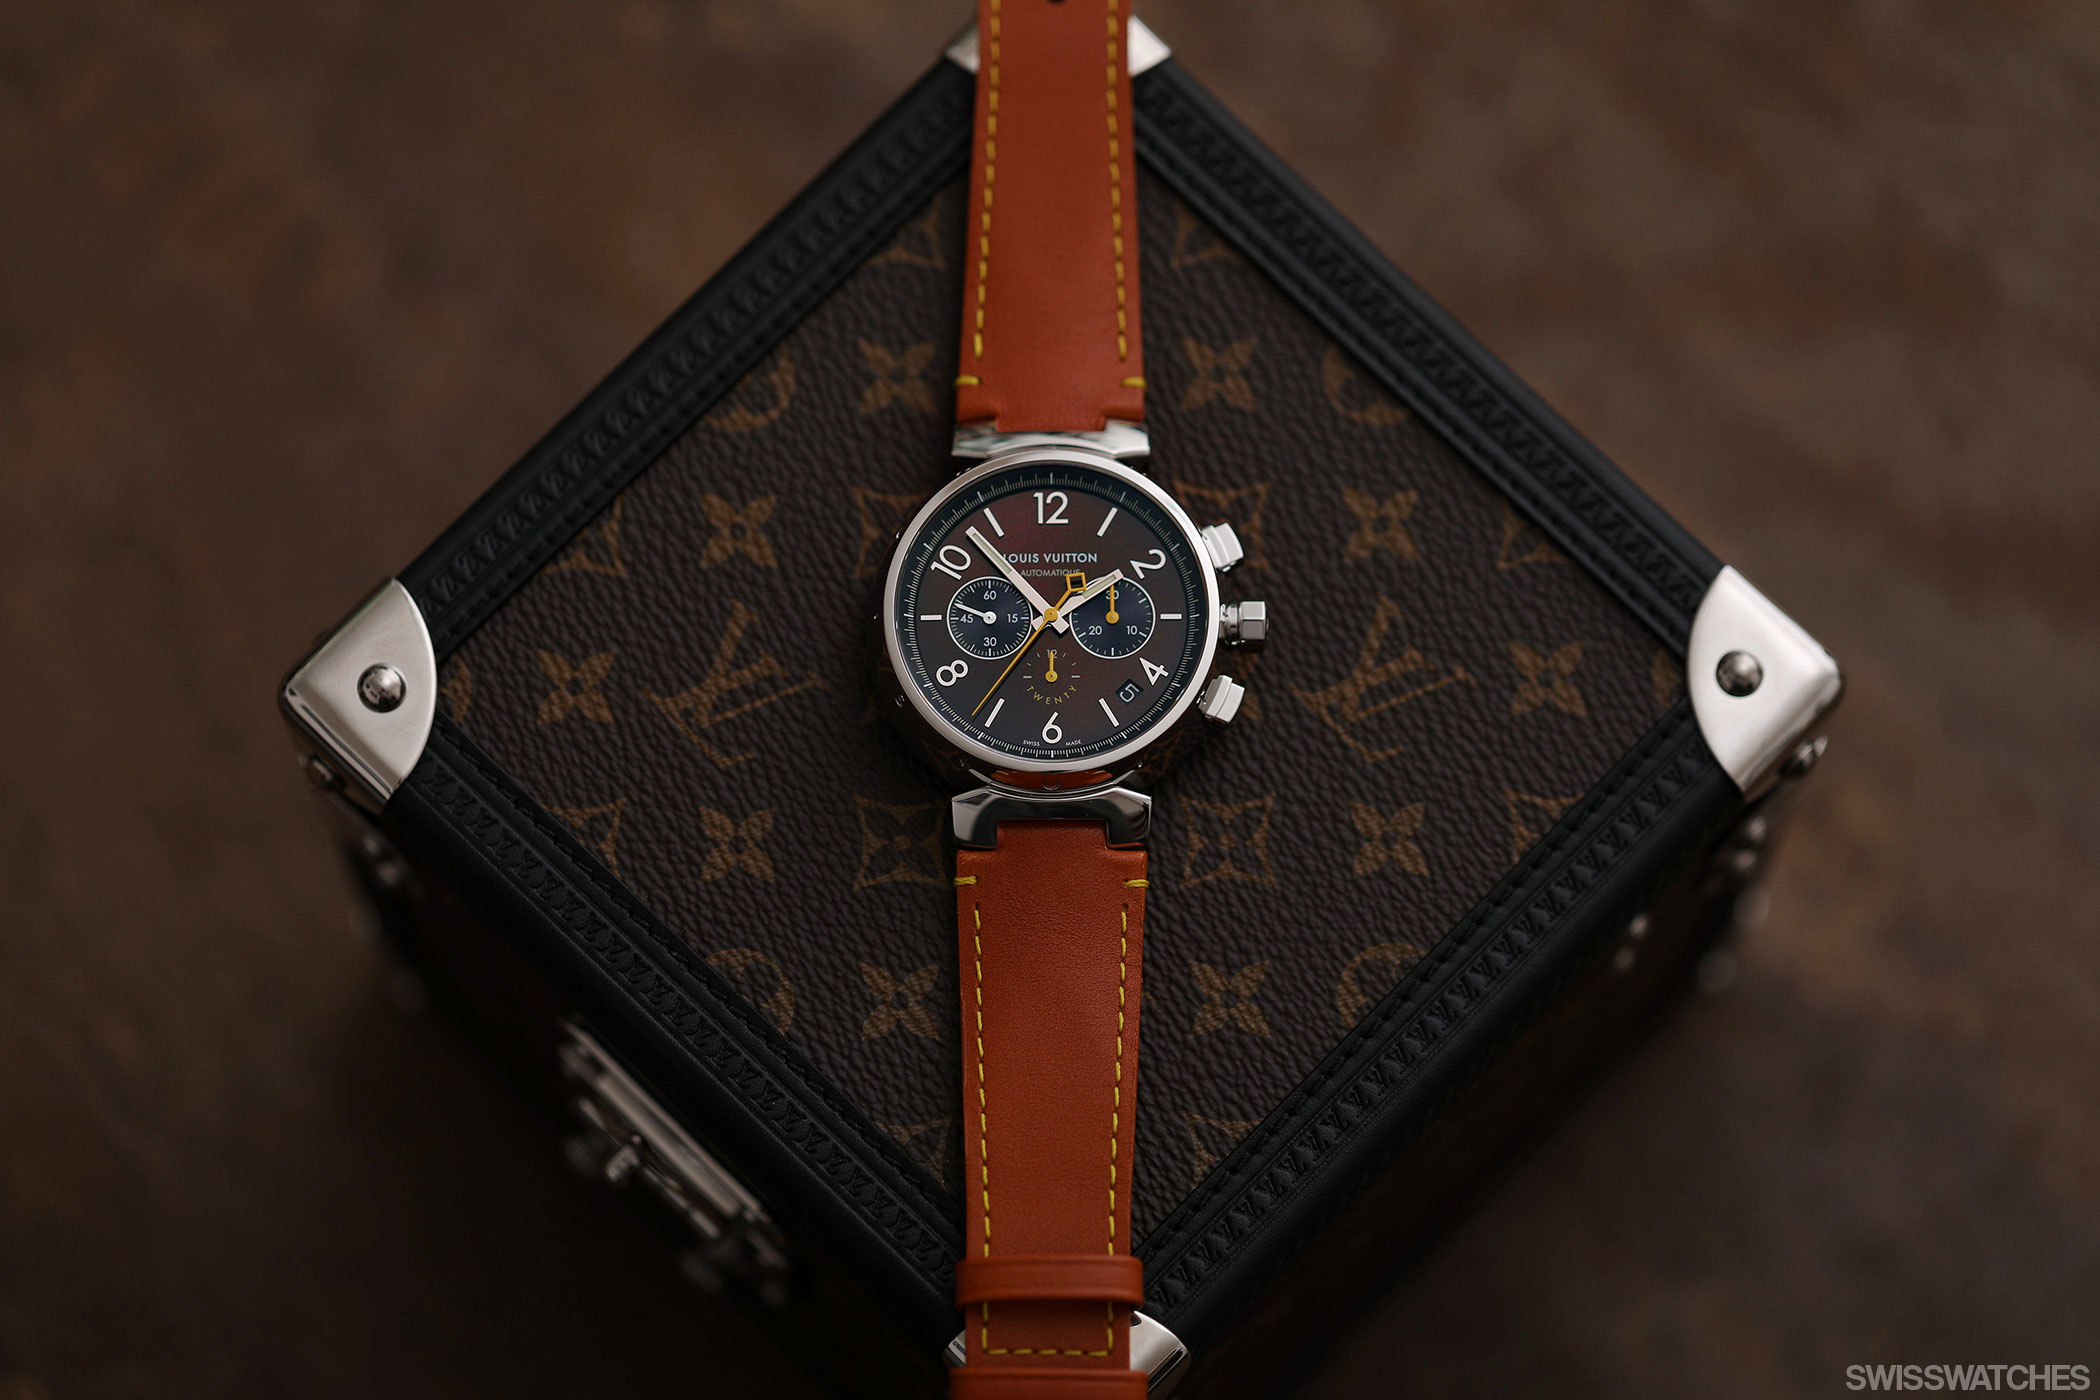 Louis Vuitton Watches Move Upmarket - The New York Times